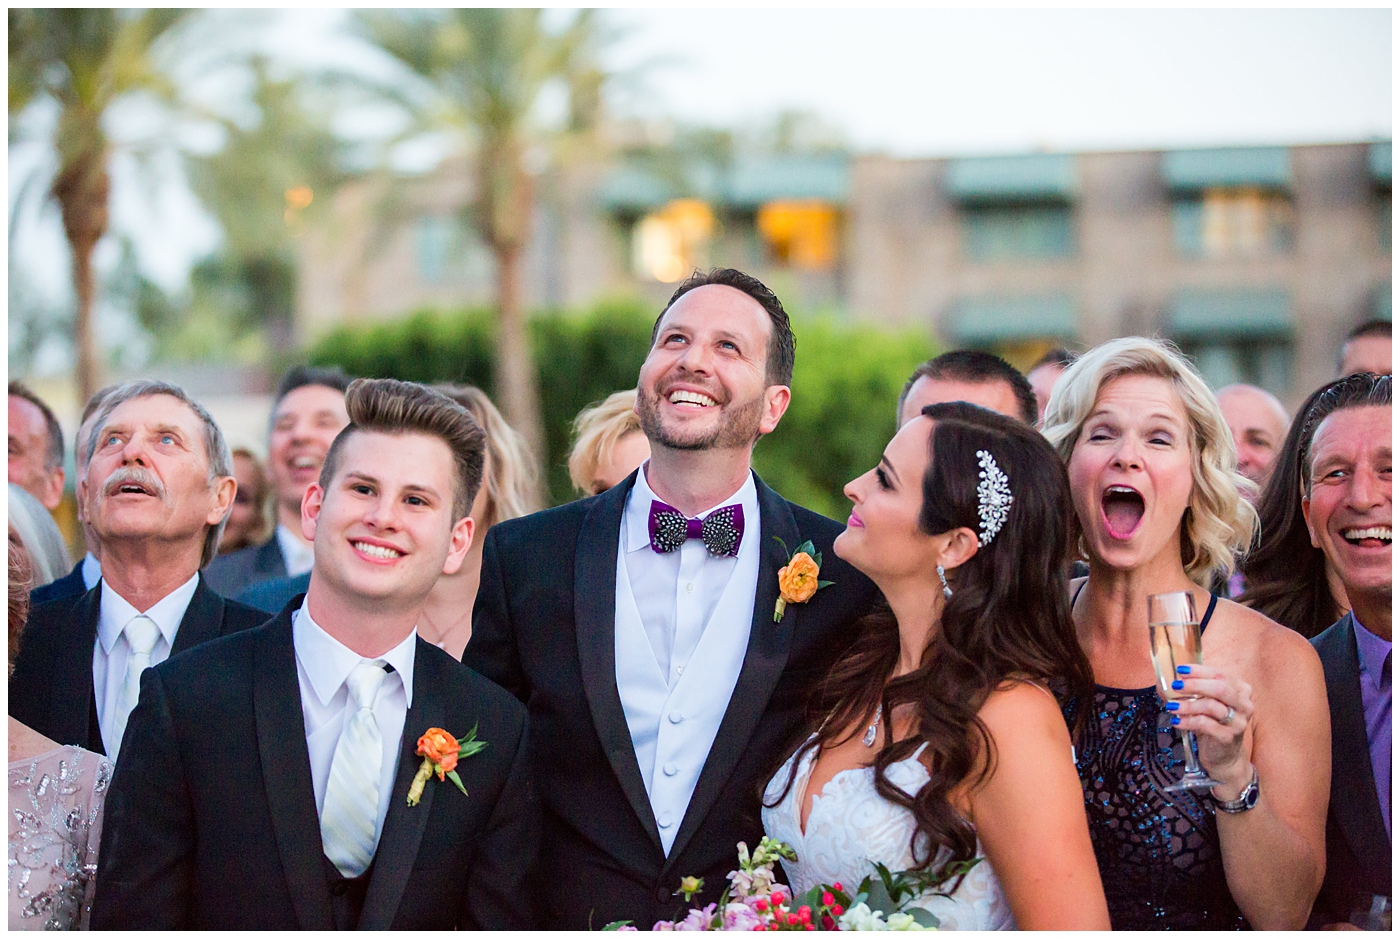 groom's reaction to surprise fireworks on wedding day